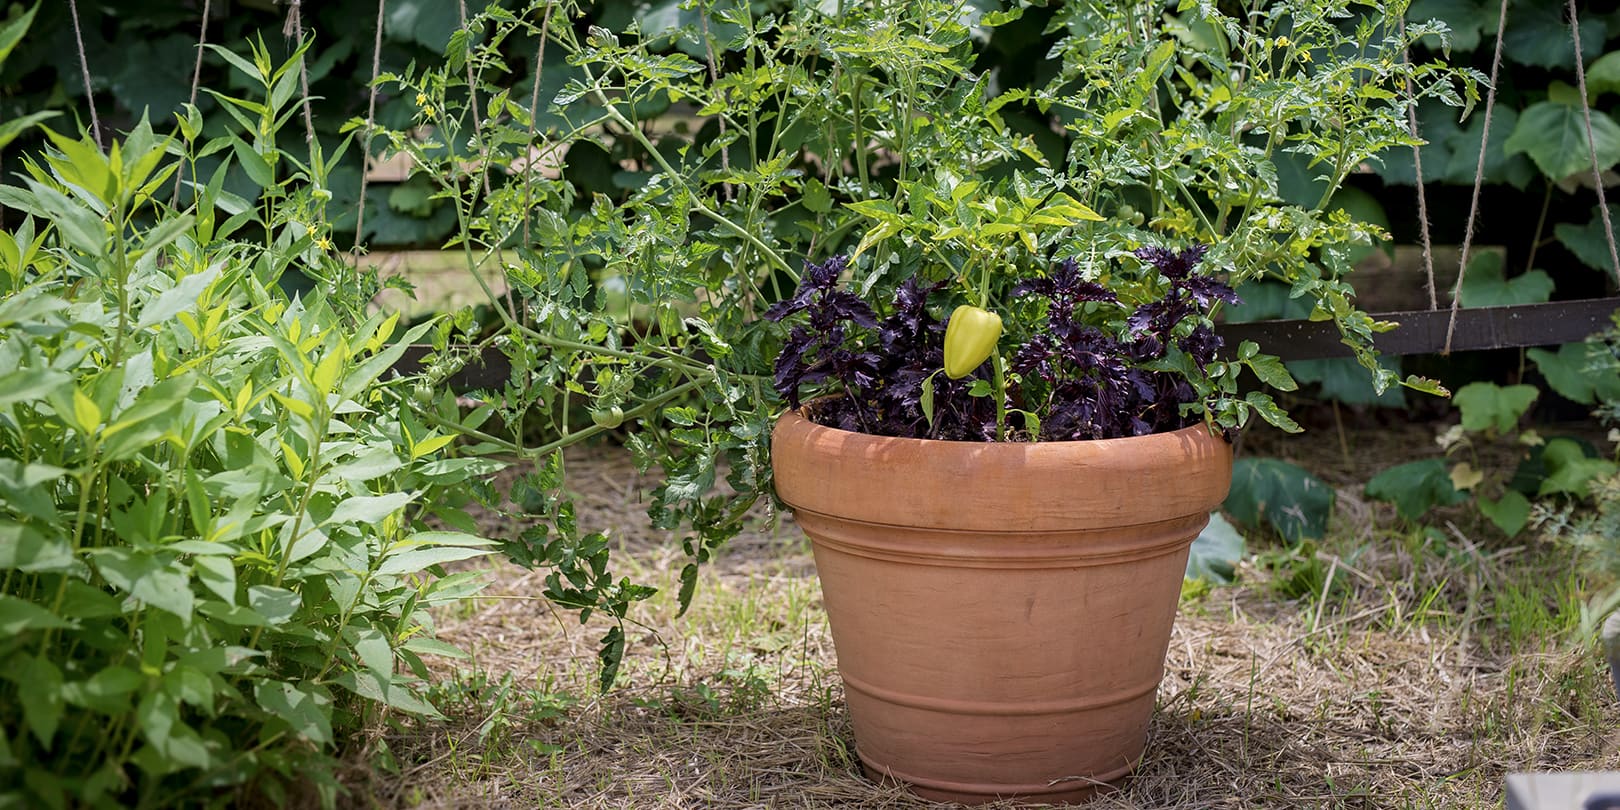 Growing  Safe, Healthy Food in Containers, By P. Allen Smith